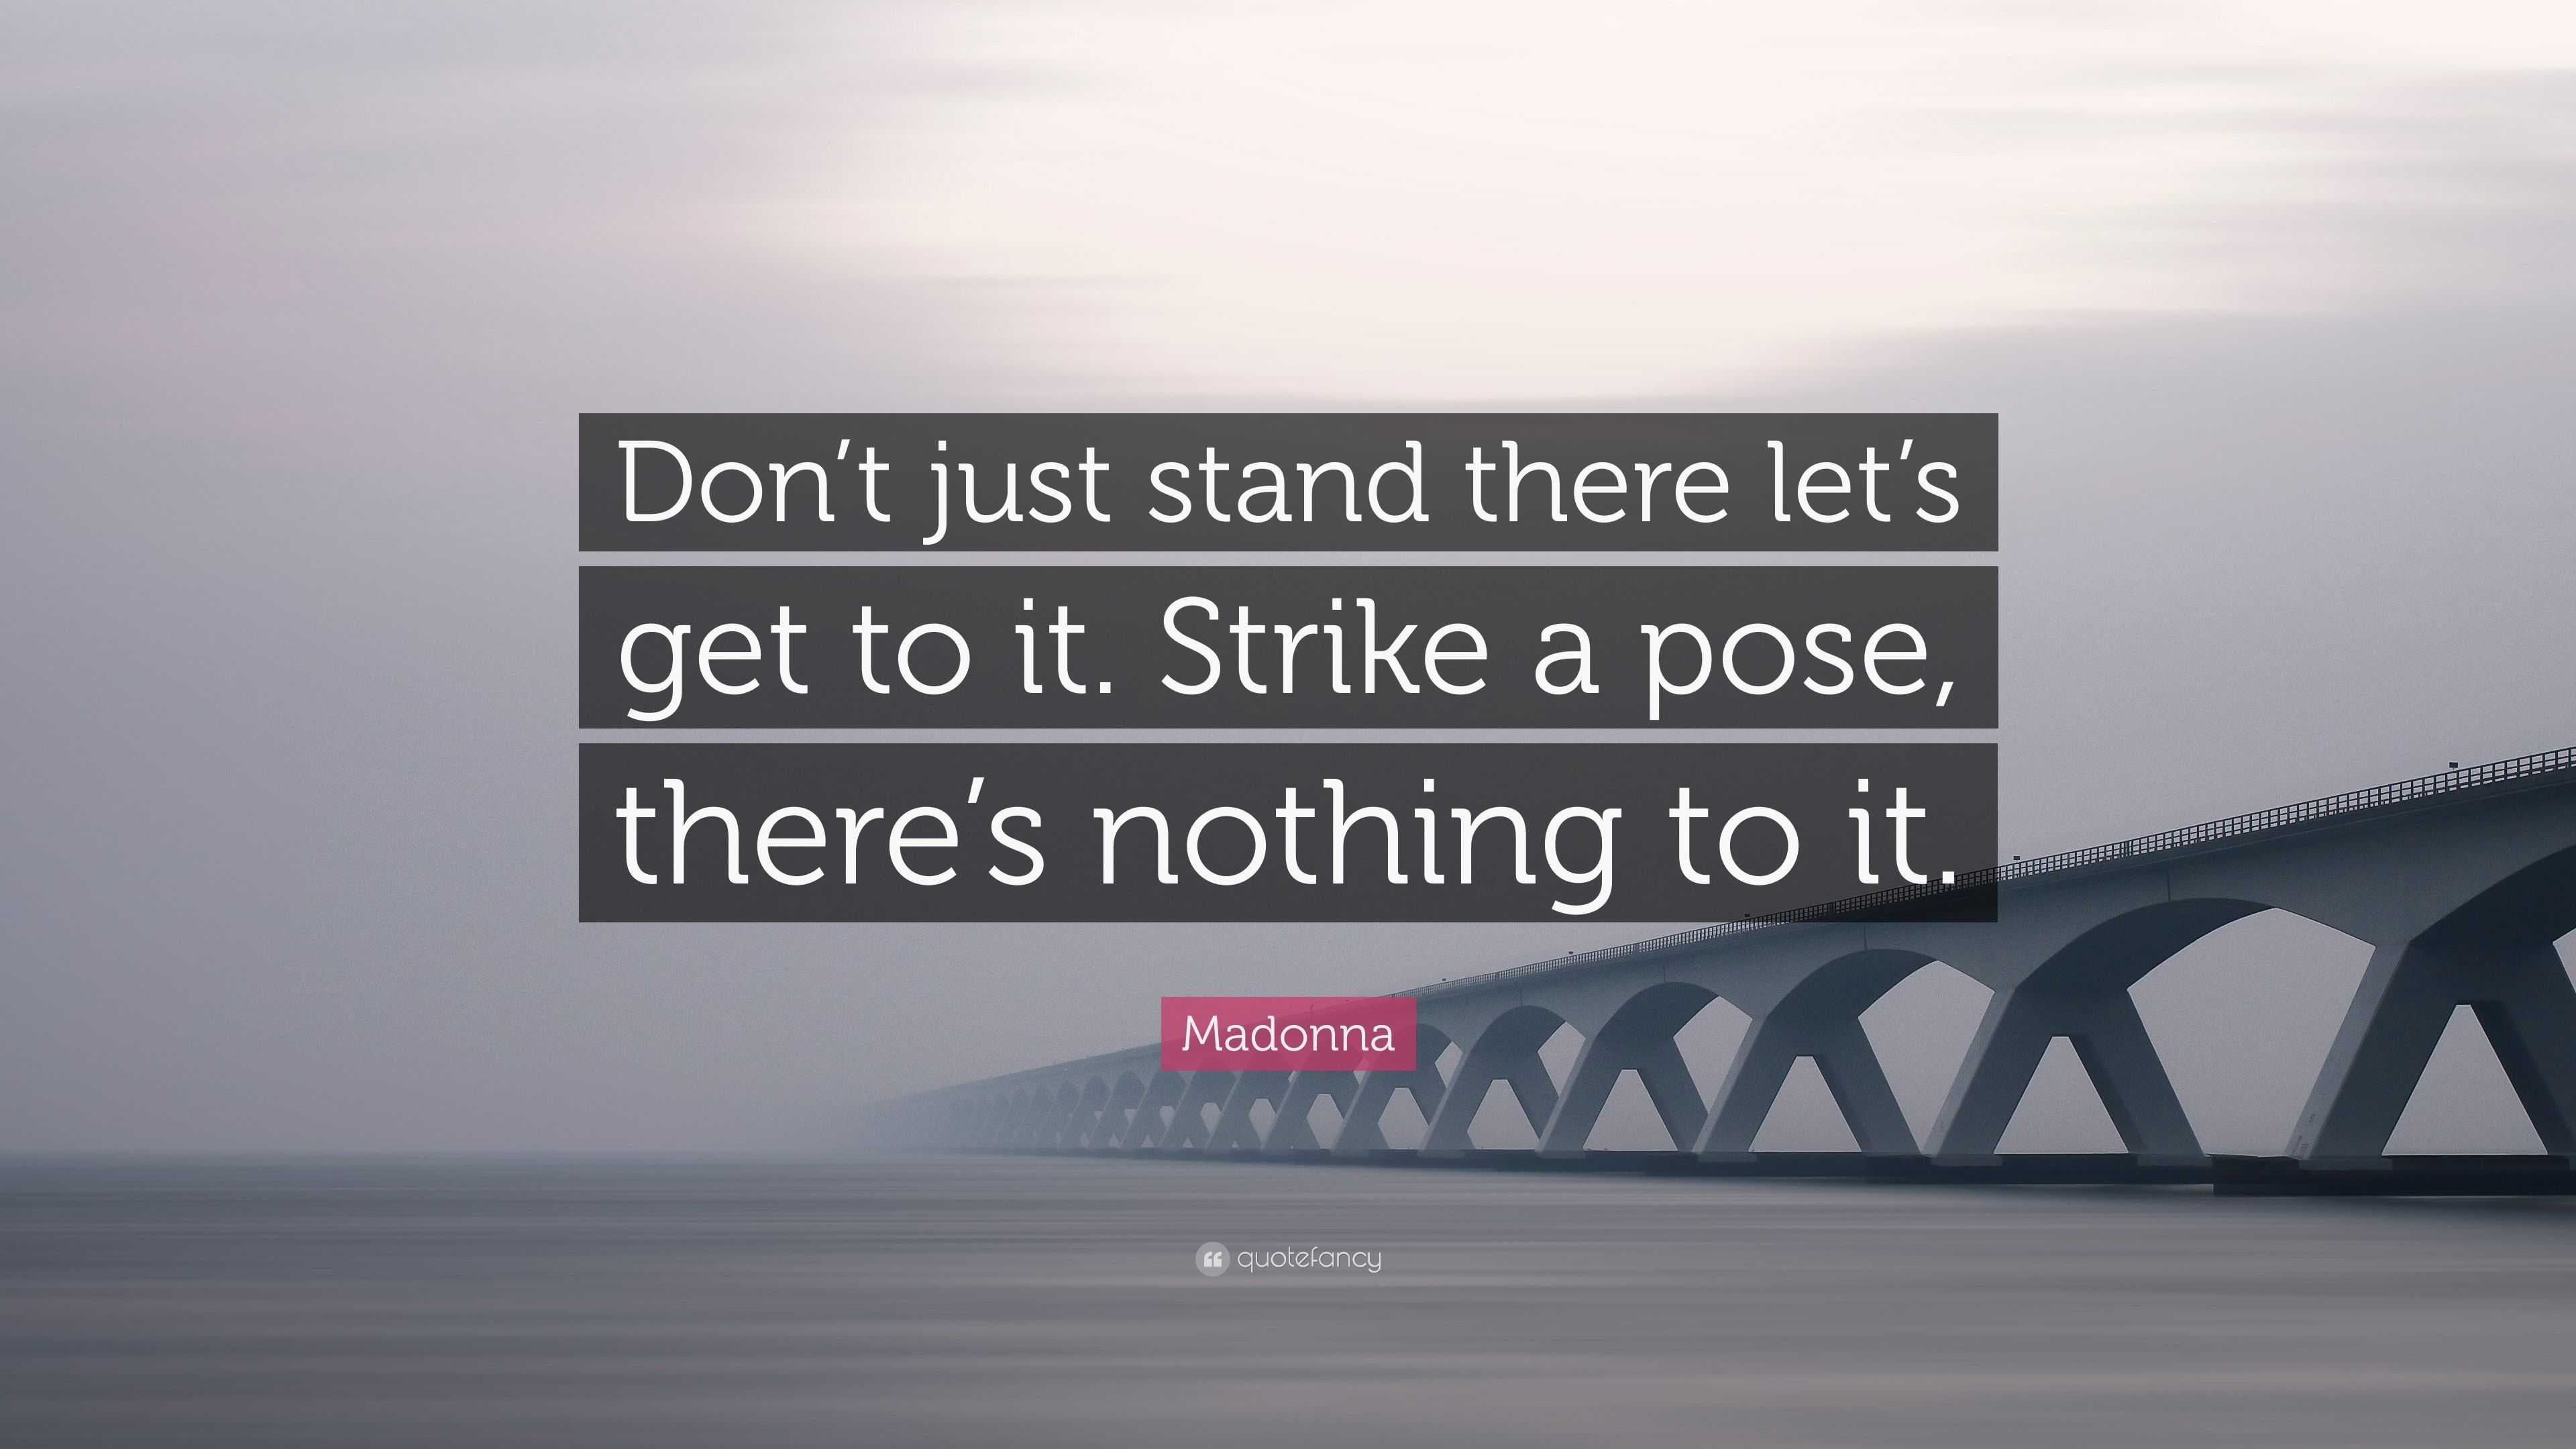 4755159 Madonna Quote Don t just stand there let s get to it Strike a pose